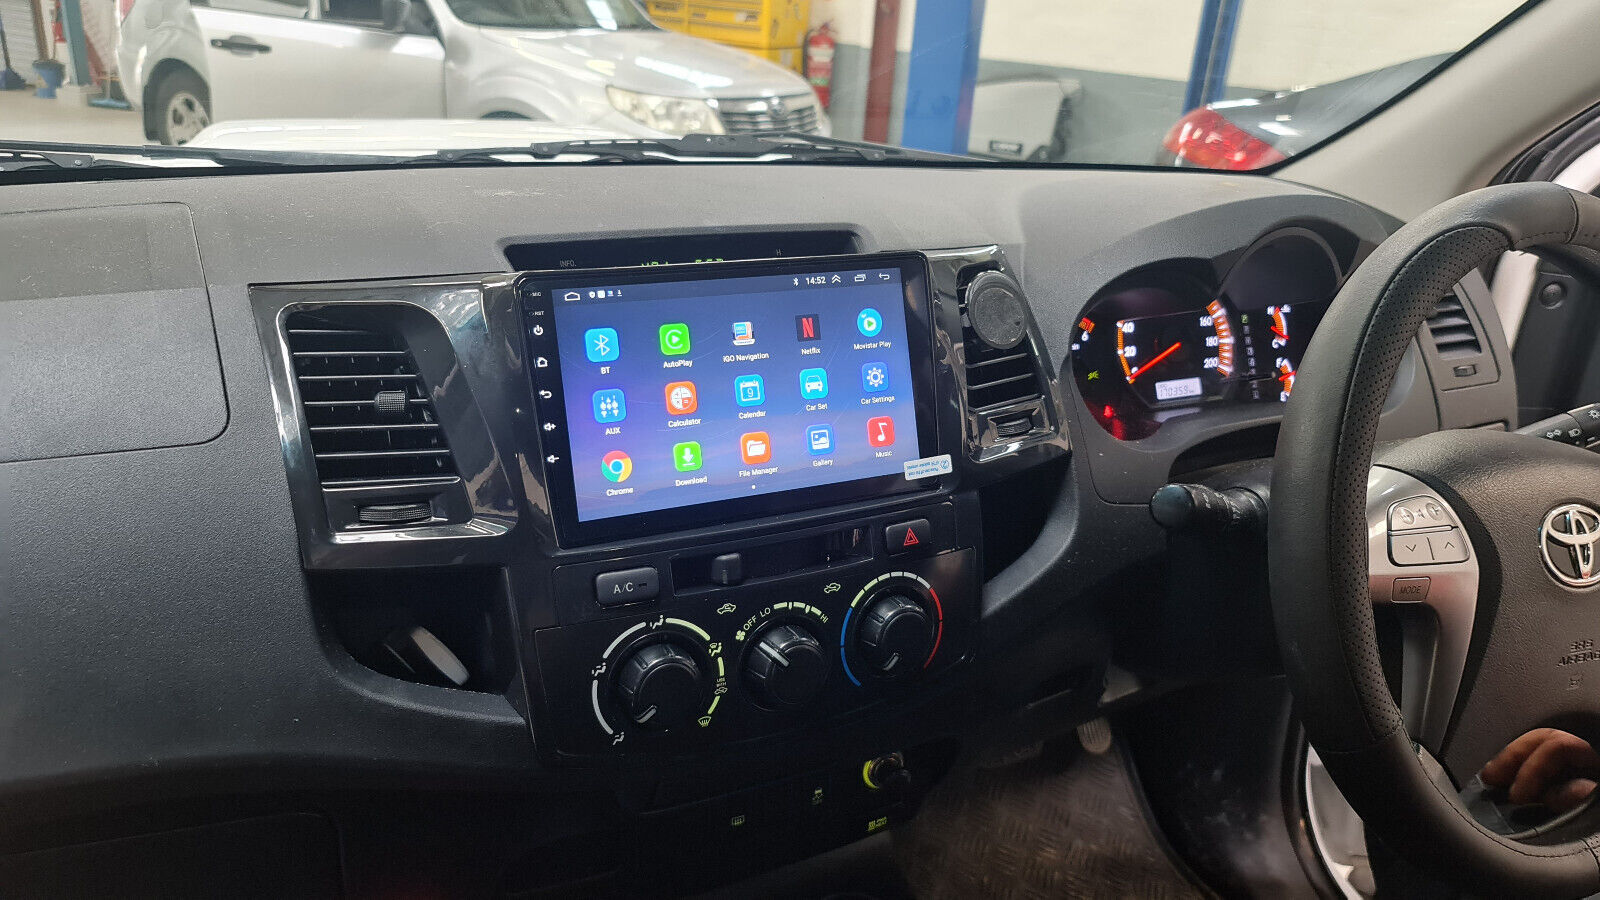 Toyota Hilux 05-16 Workmate SR5 GPS Wireless Apple CarPlay Stereo GPS camera,  Toyota Hilux 05-16 Workmate SR5 head unit upgrade for Toyota Hilux 05-16 Workmate SR5 , head unit replacement for Toyota Hilux 05-16 Workmate SR5 upgrade, Toyota Hilux 05-16 Workmate SR5 stereo upgrade suit both manual and digital air condition control, provides installation. Upgrade to the Latest Wireless Apple CarPlay Android Auto